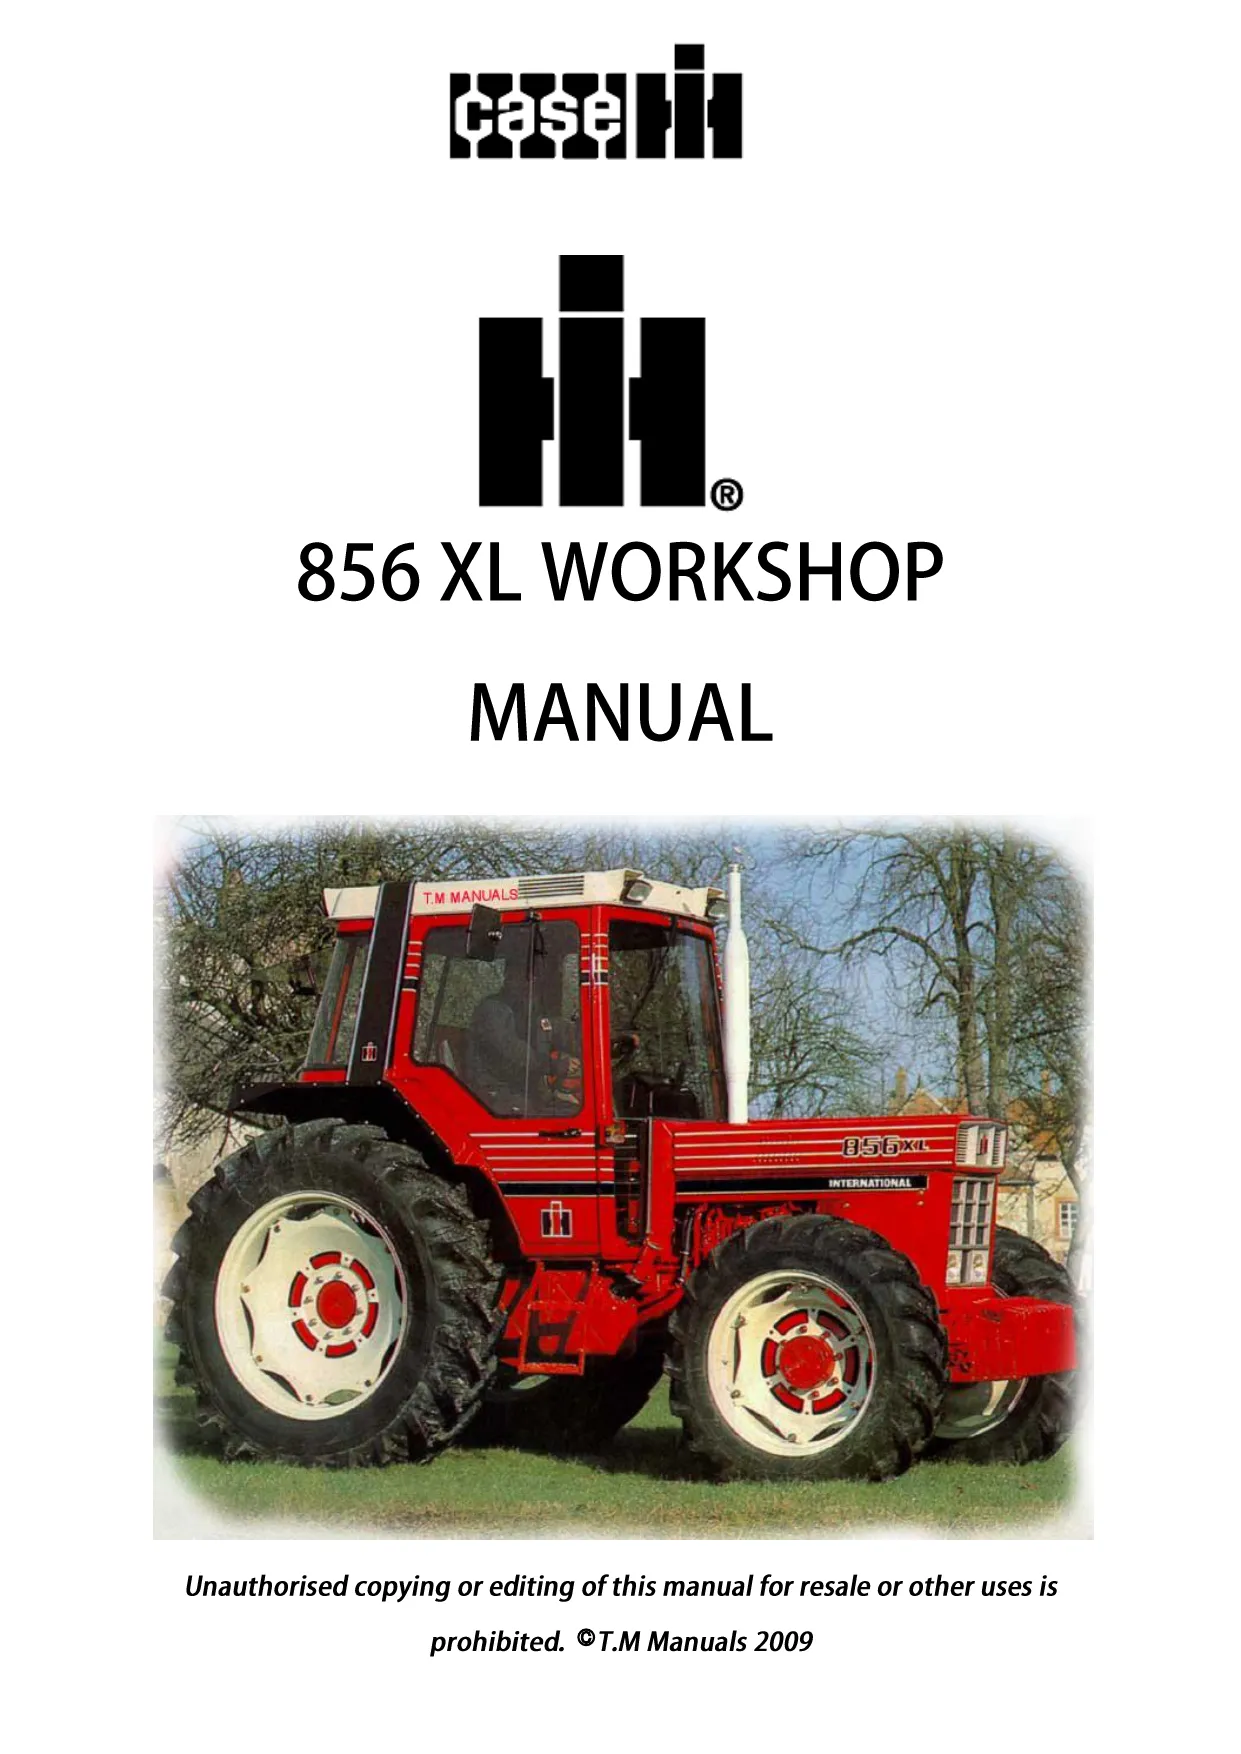 1985-1987 CaseIH 856XL tractor workshop manual Preview image 1